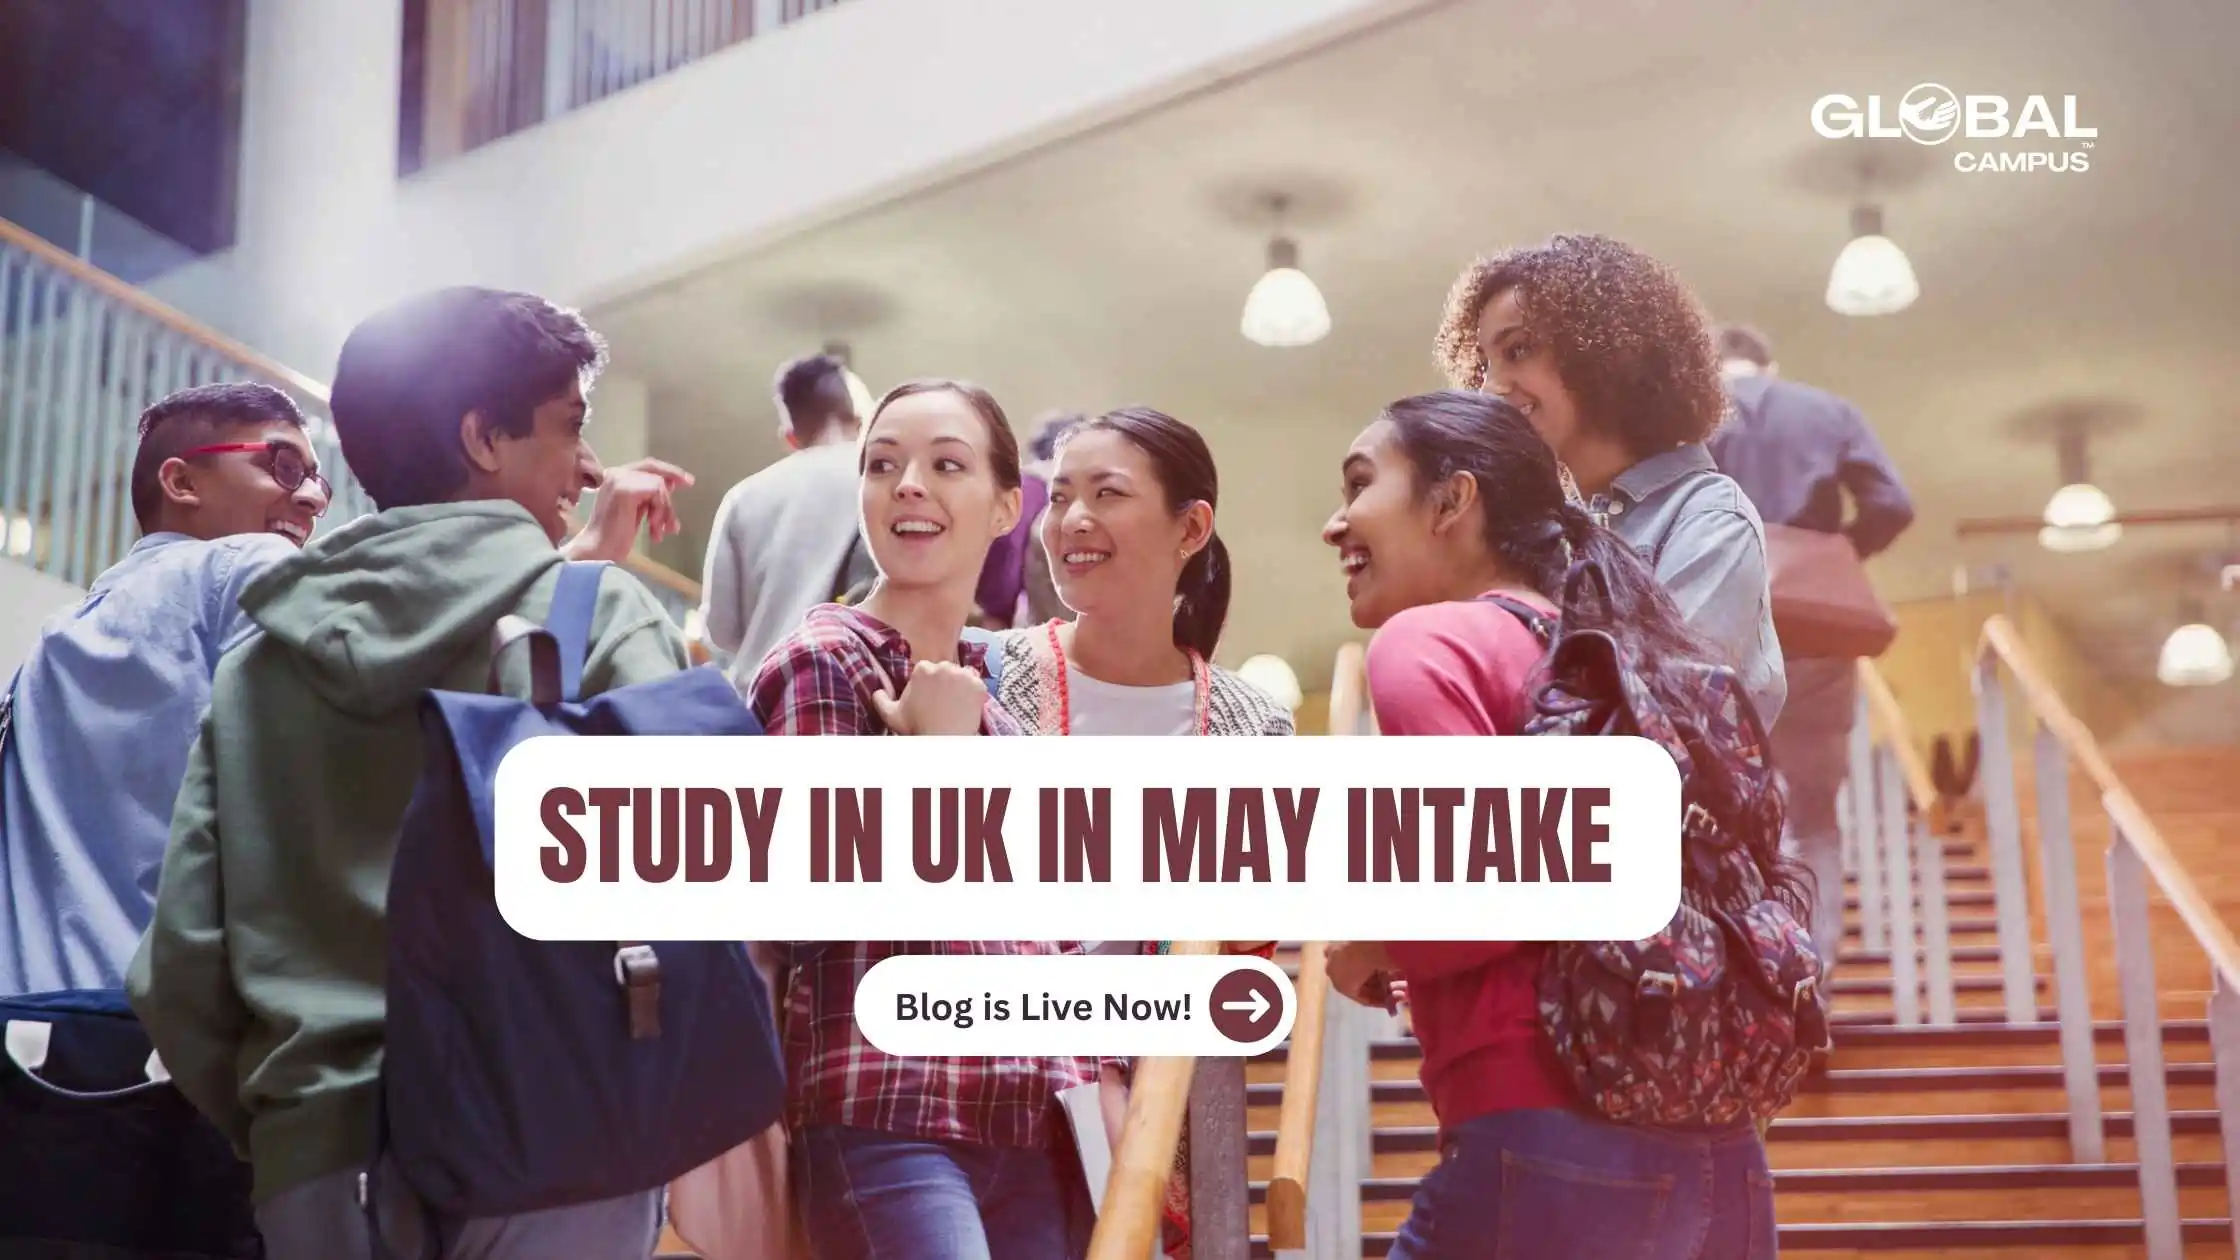 A group of students Studying in UK in May Intake.